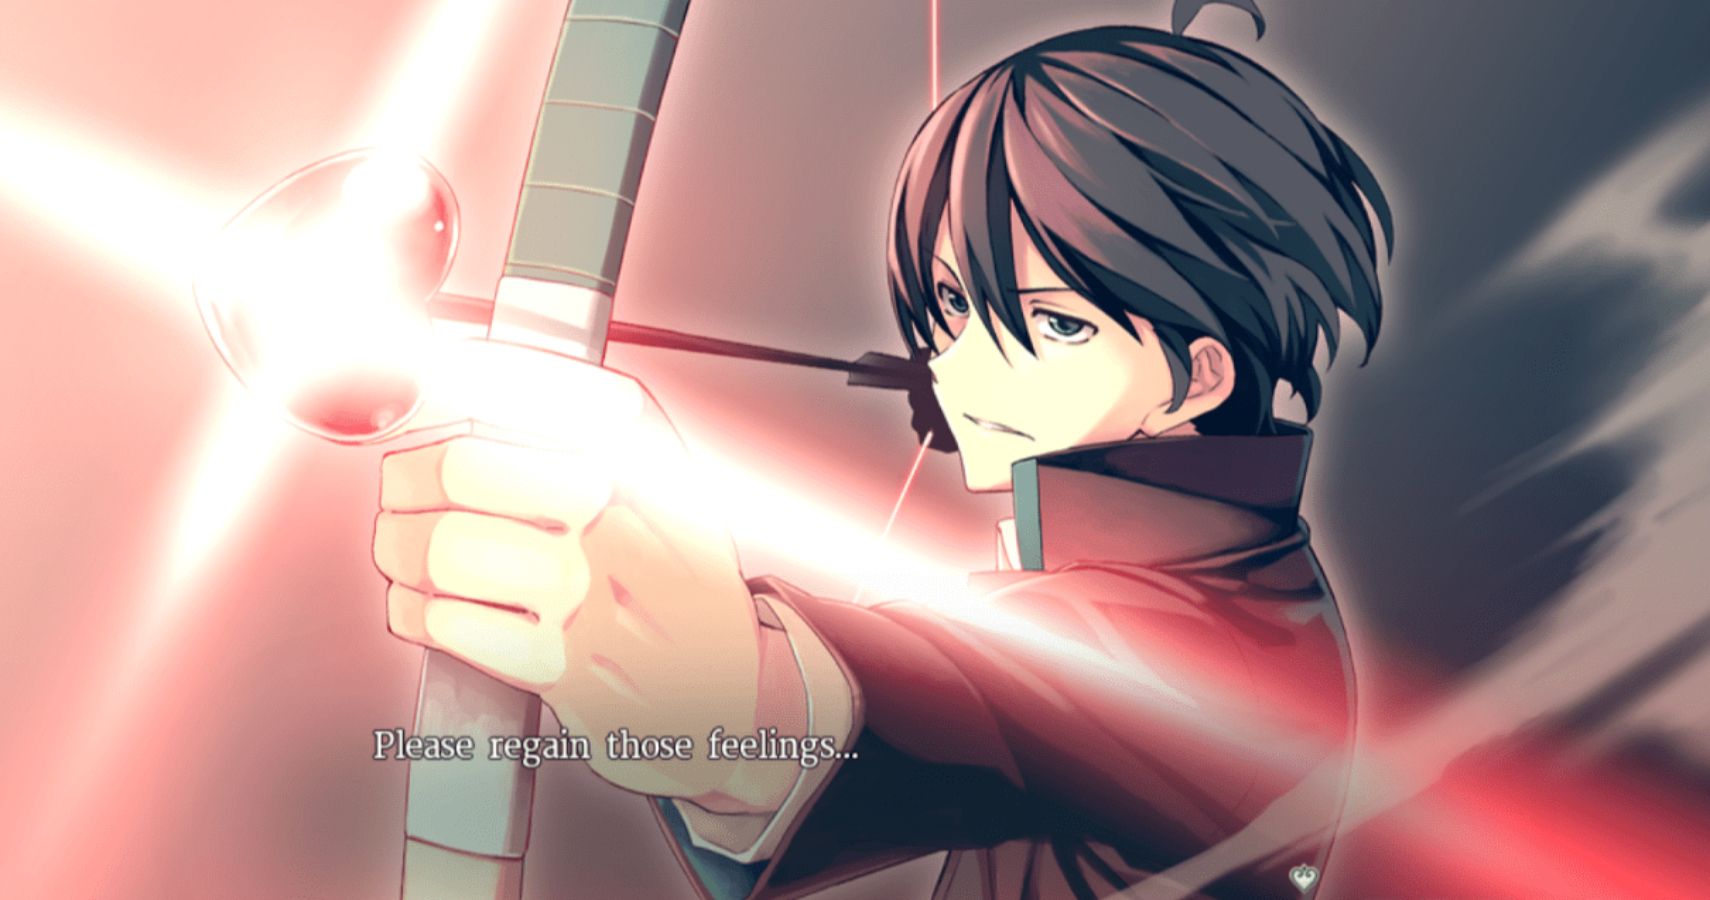 MangaGamer Dishes On Steam Removing Its Game